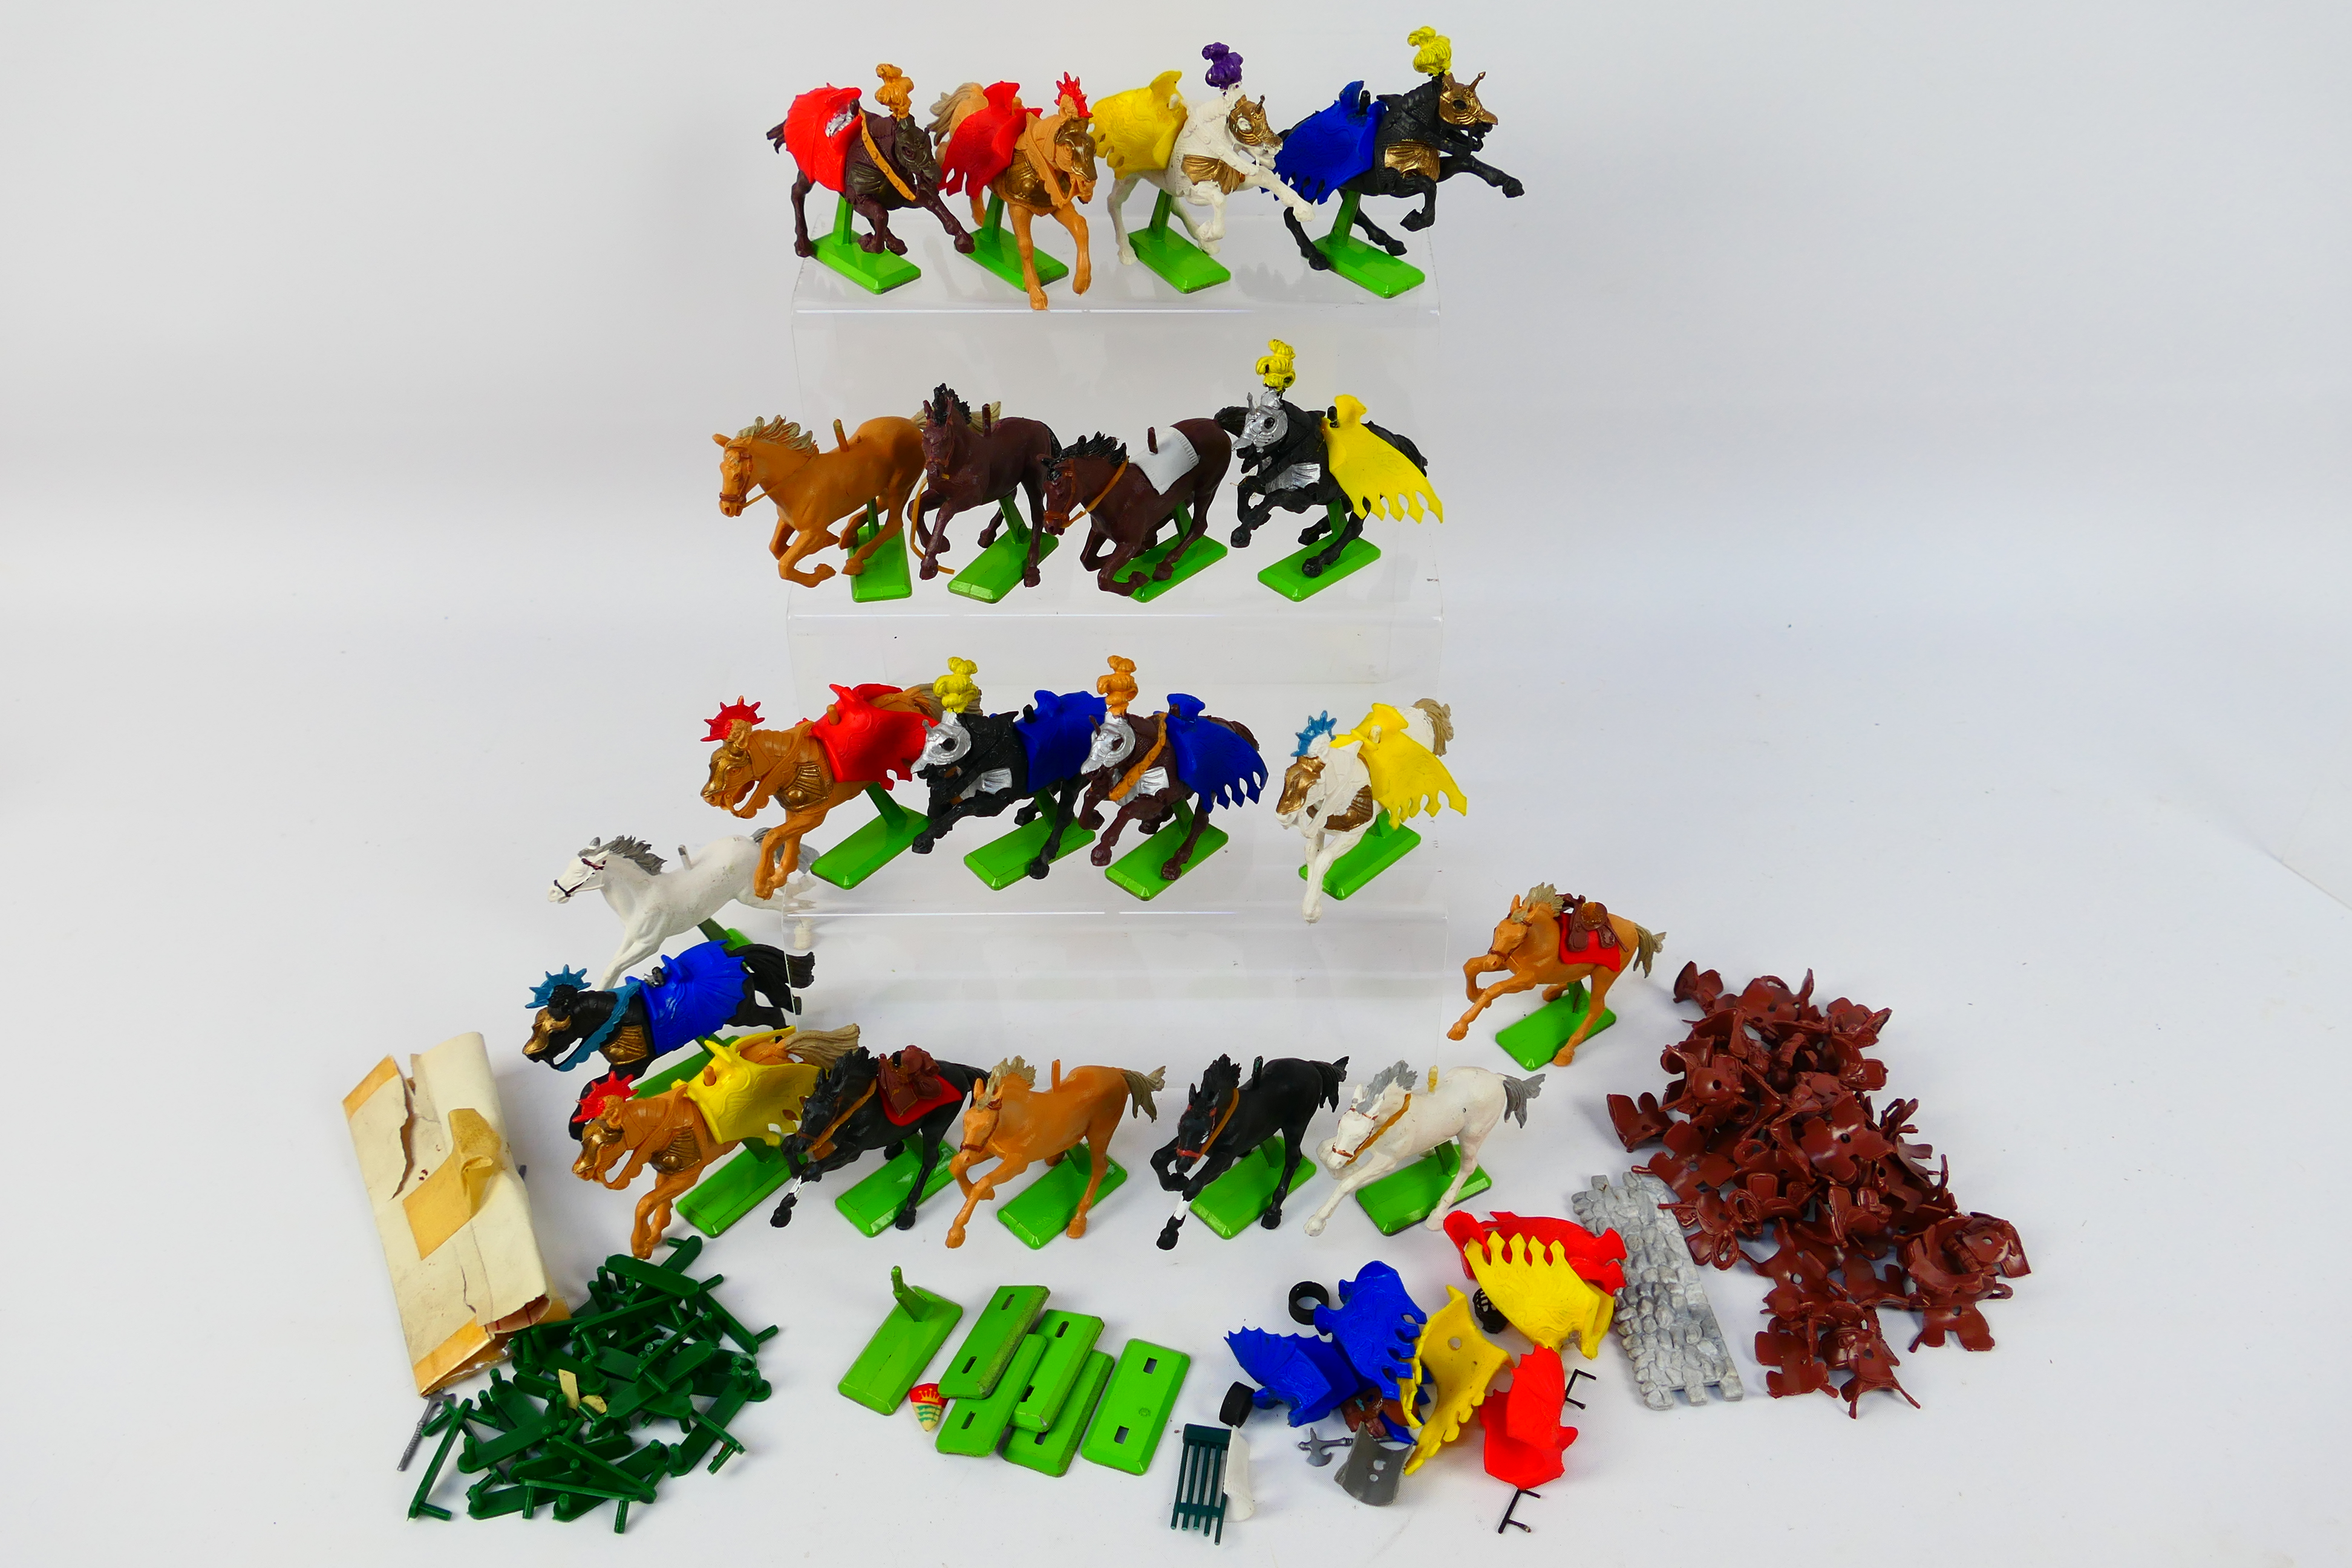 Britains - An unboxed collection of 20 Britains Deetail unfinished horses.